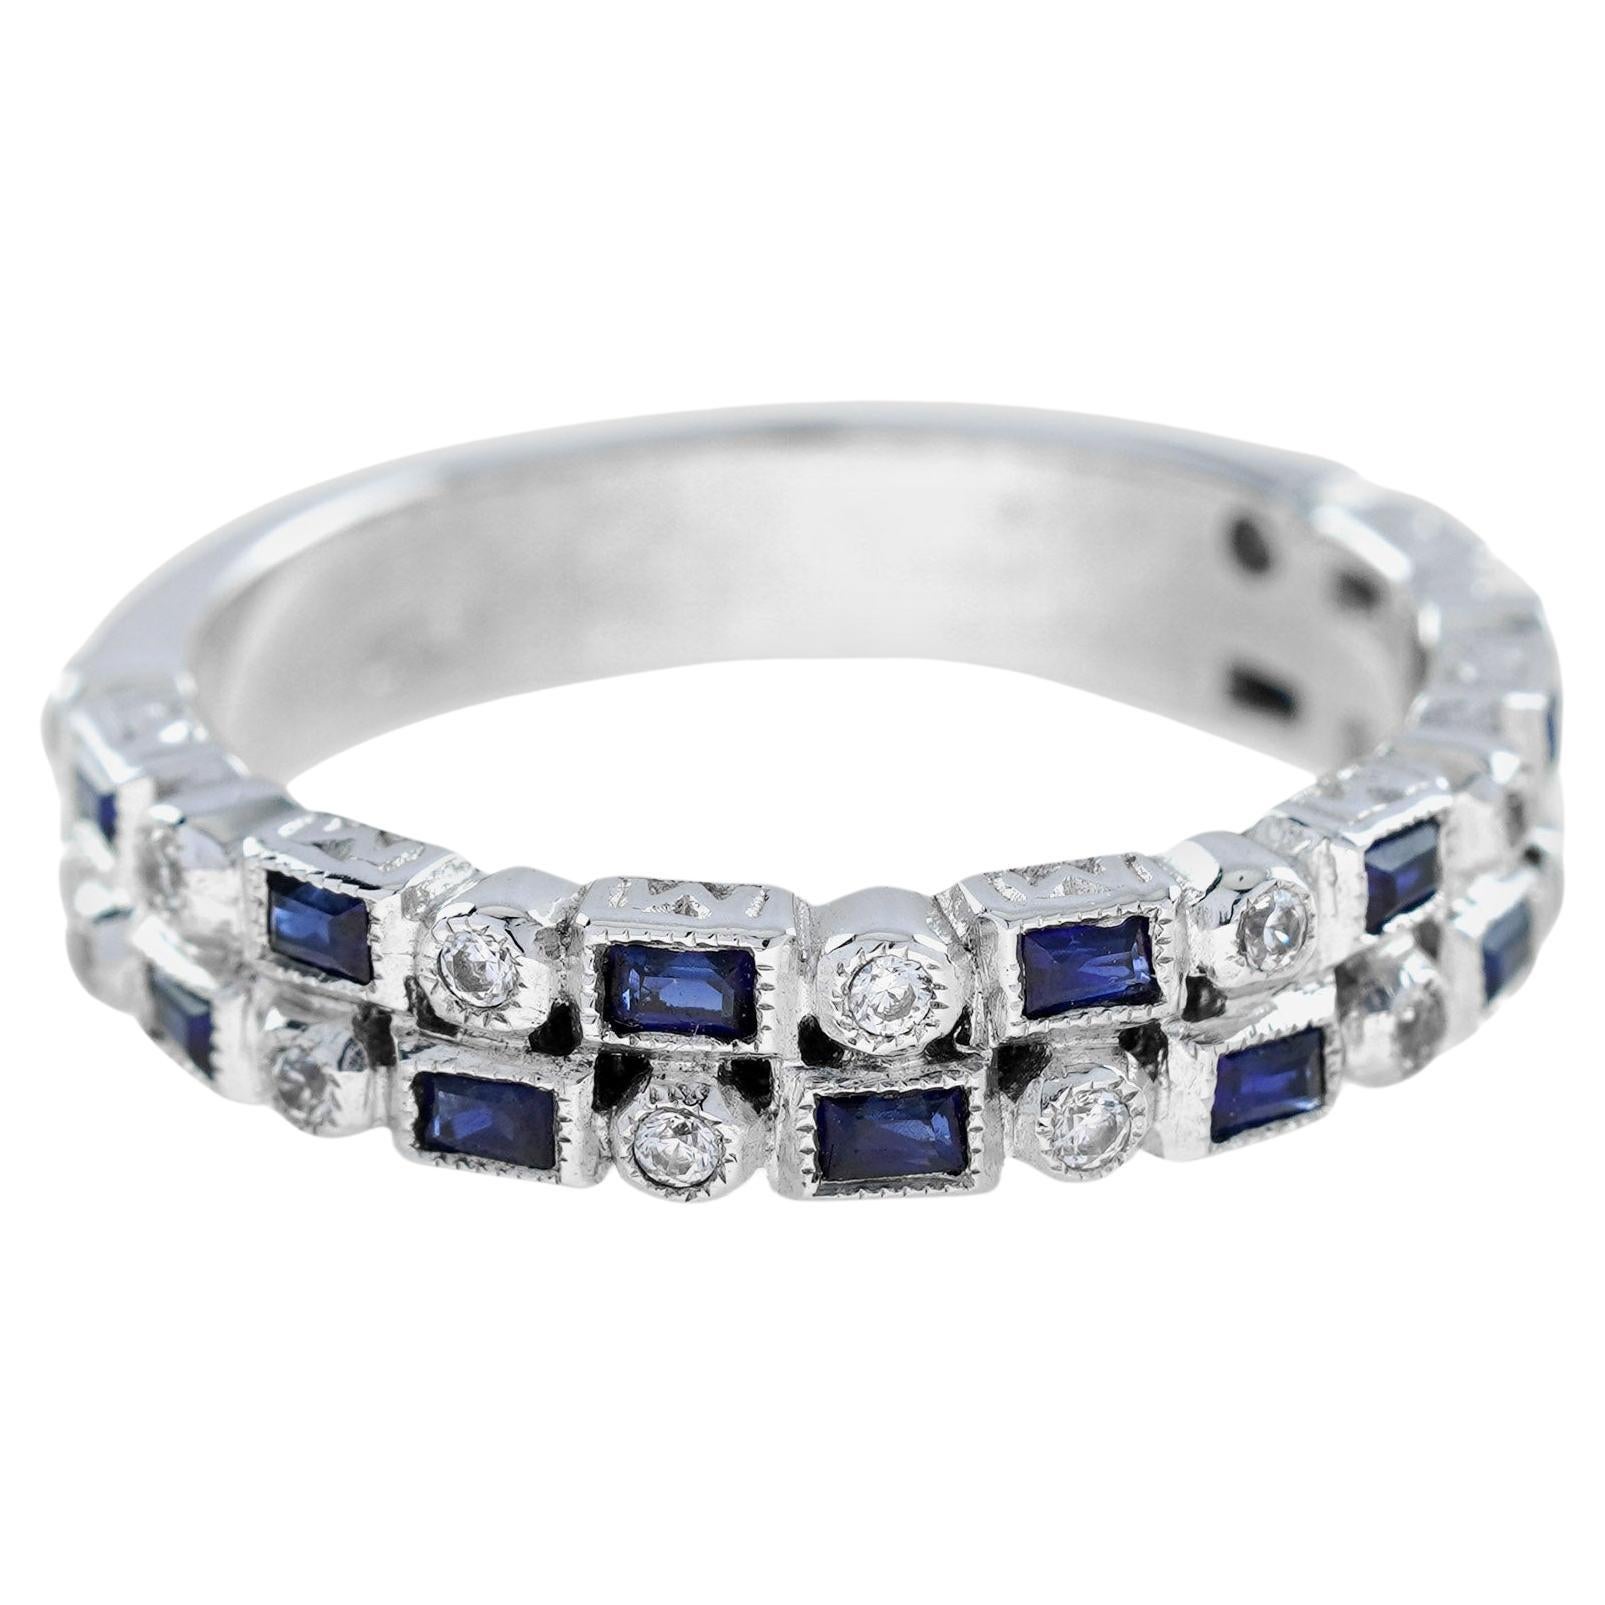 For Sale:  Diamond and Blue Sapphire Art Deco Style Half Eternity Ring in 14K White Gold